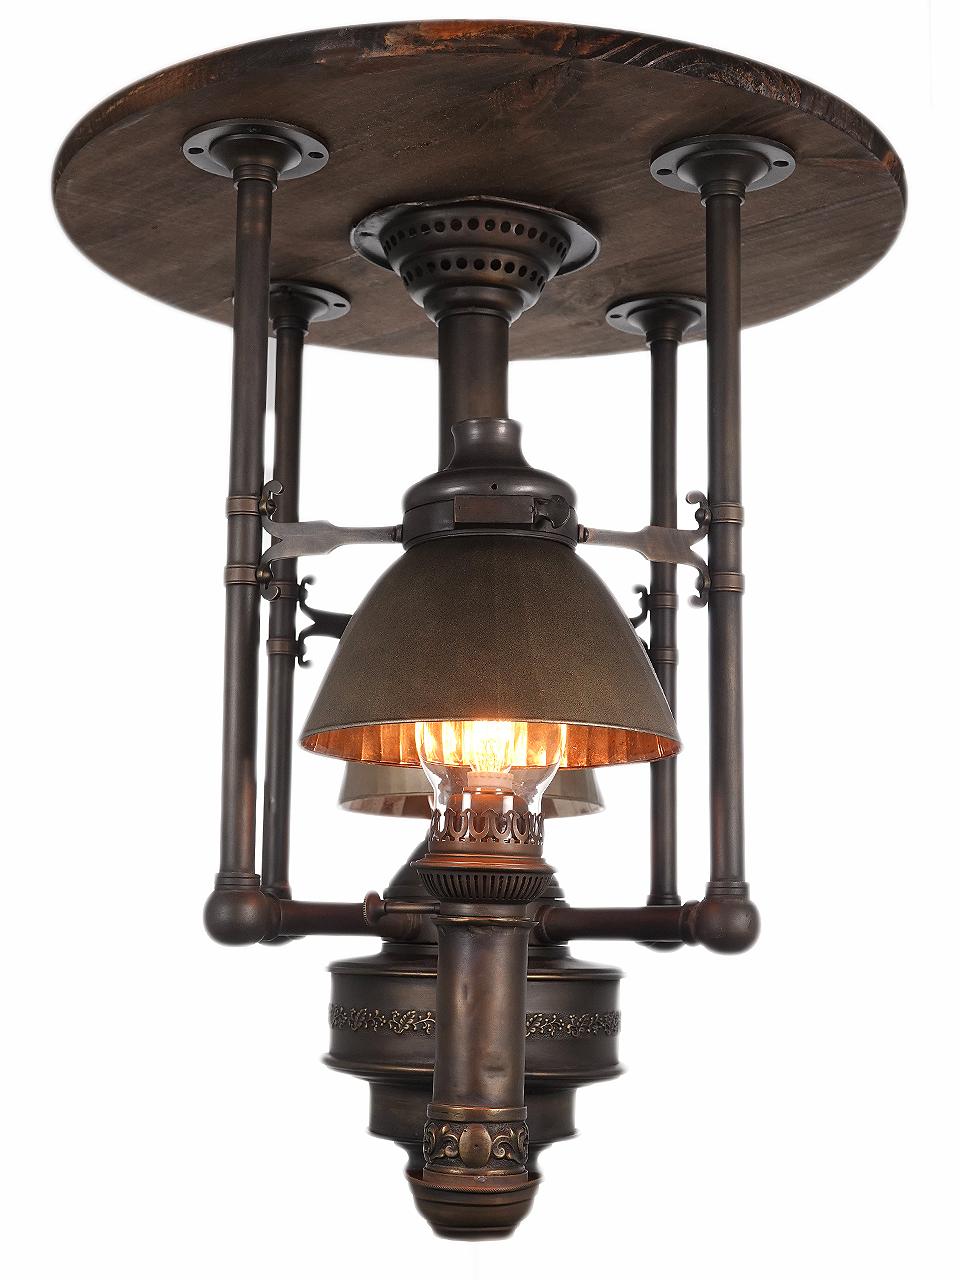 19th Century Museum Quality Hicks and Smith Rail Car Center Lamp For Sale